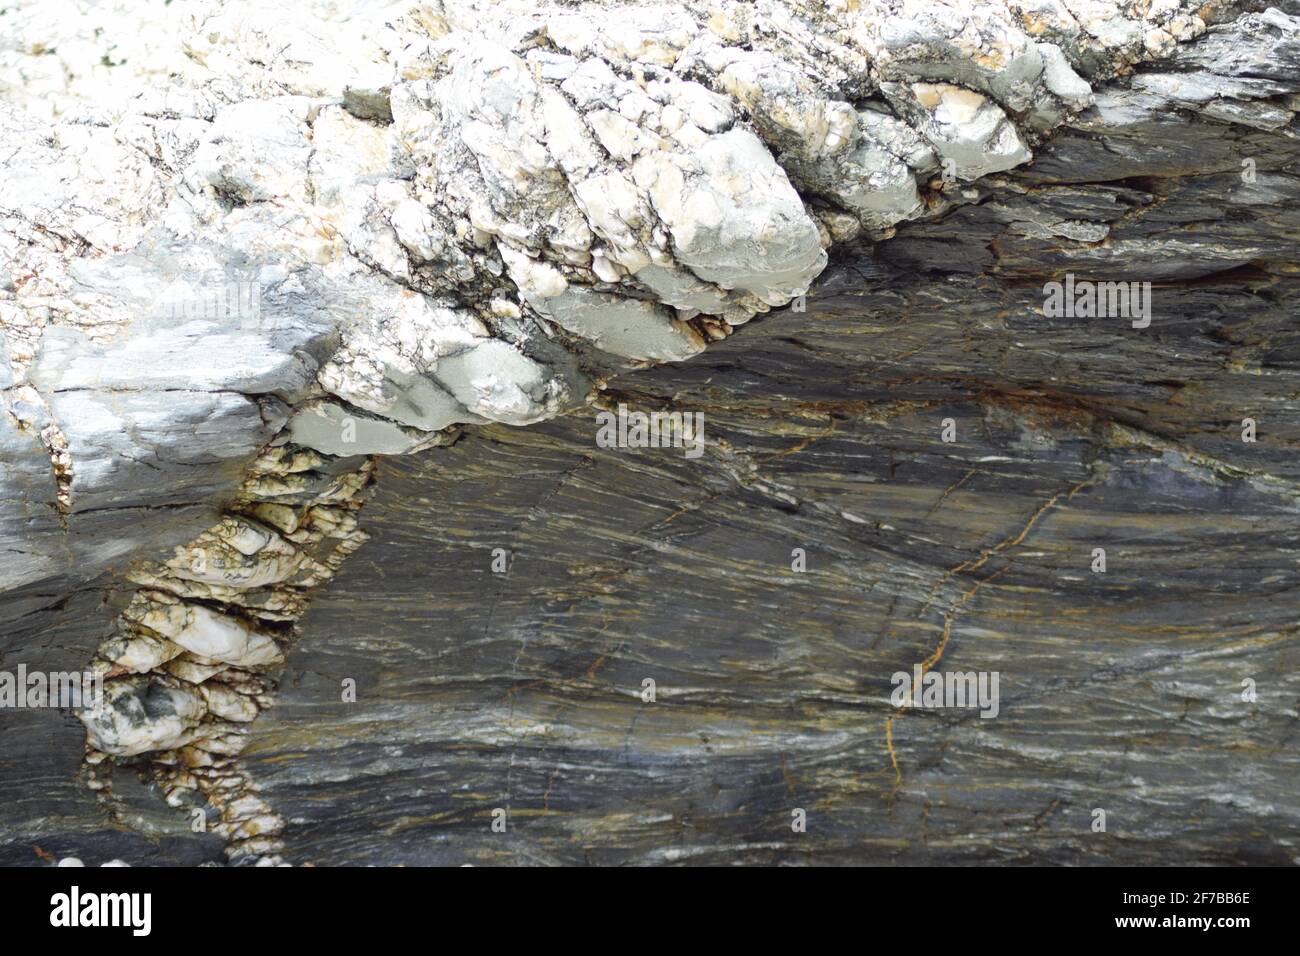 Breaking Wave Rock Formation Stock Photo